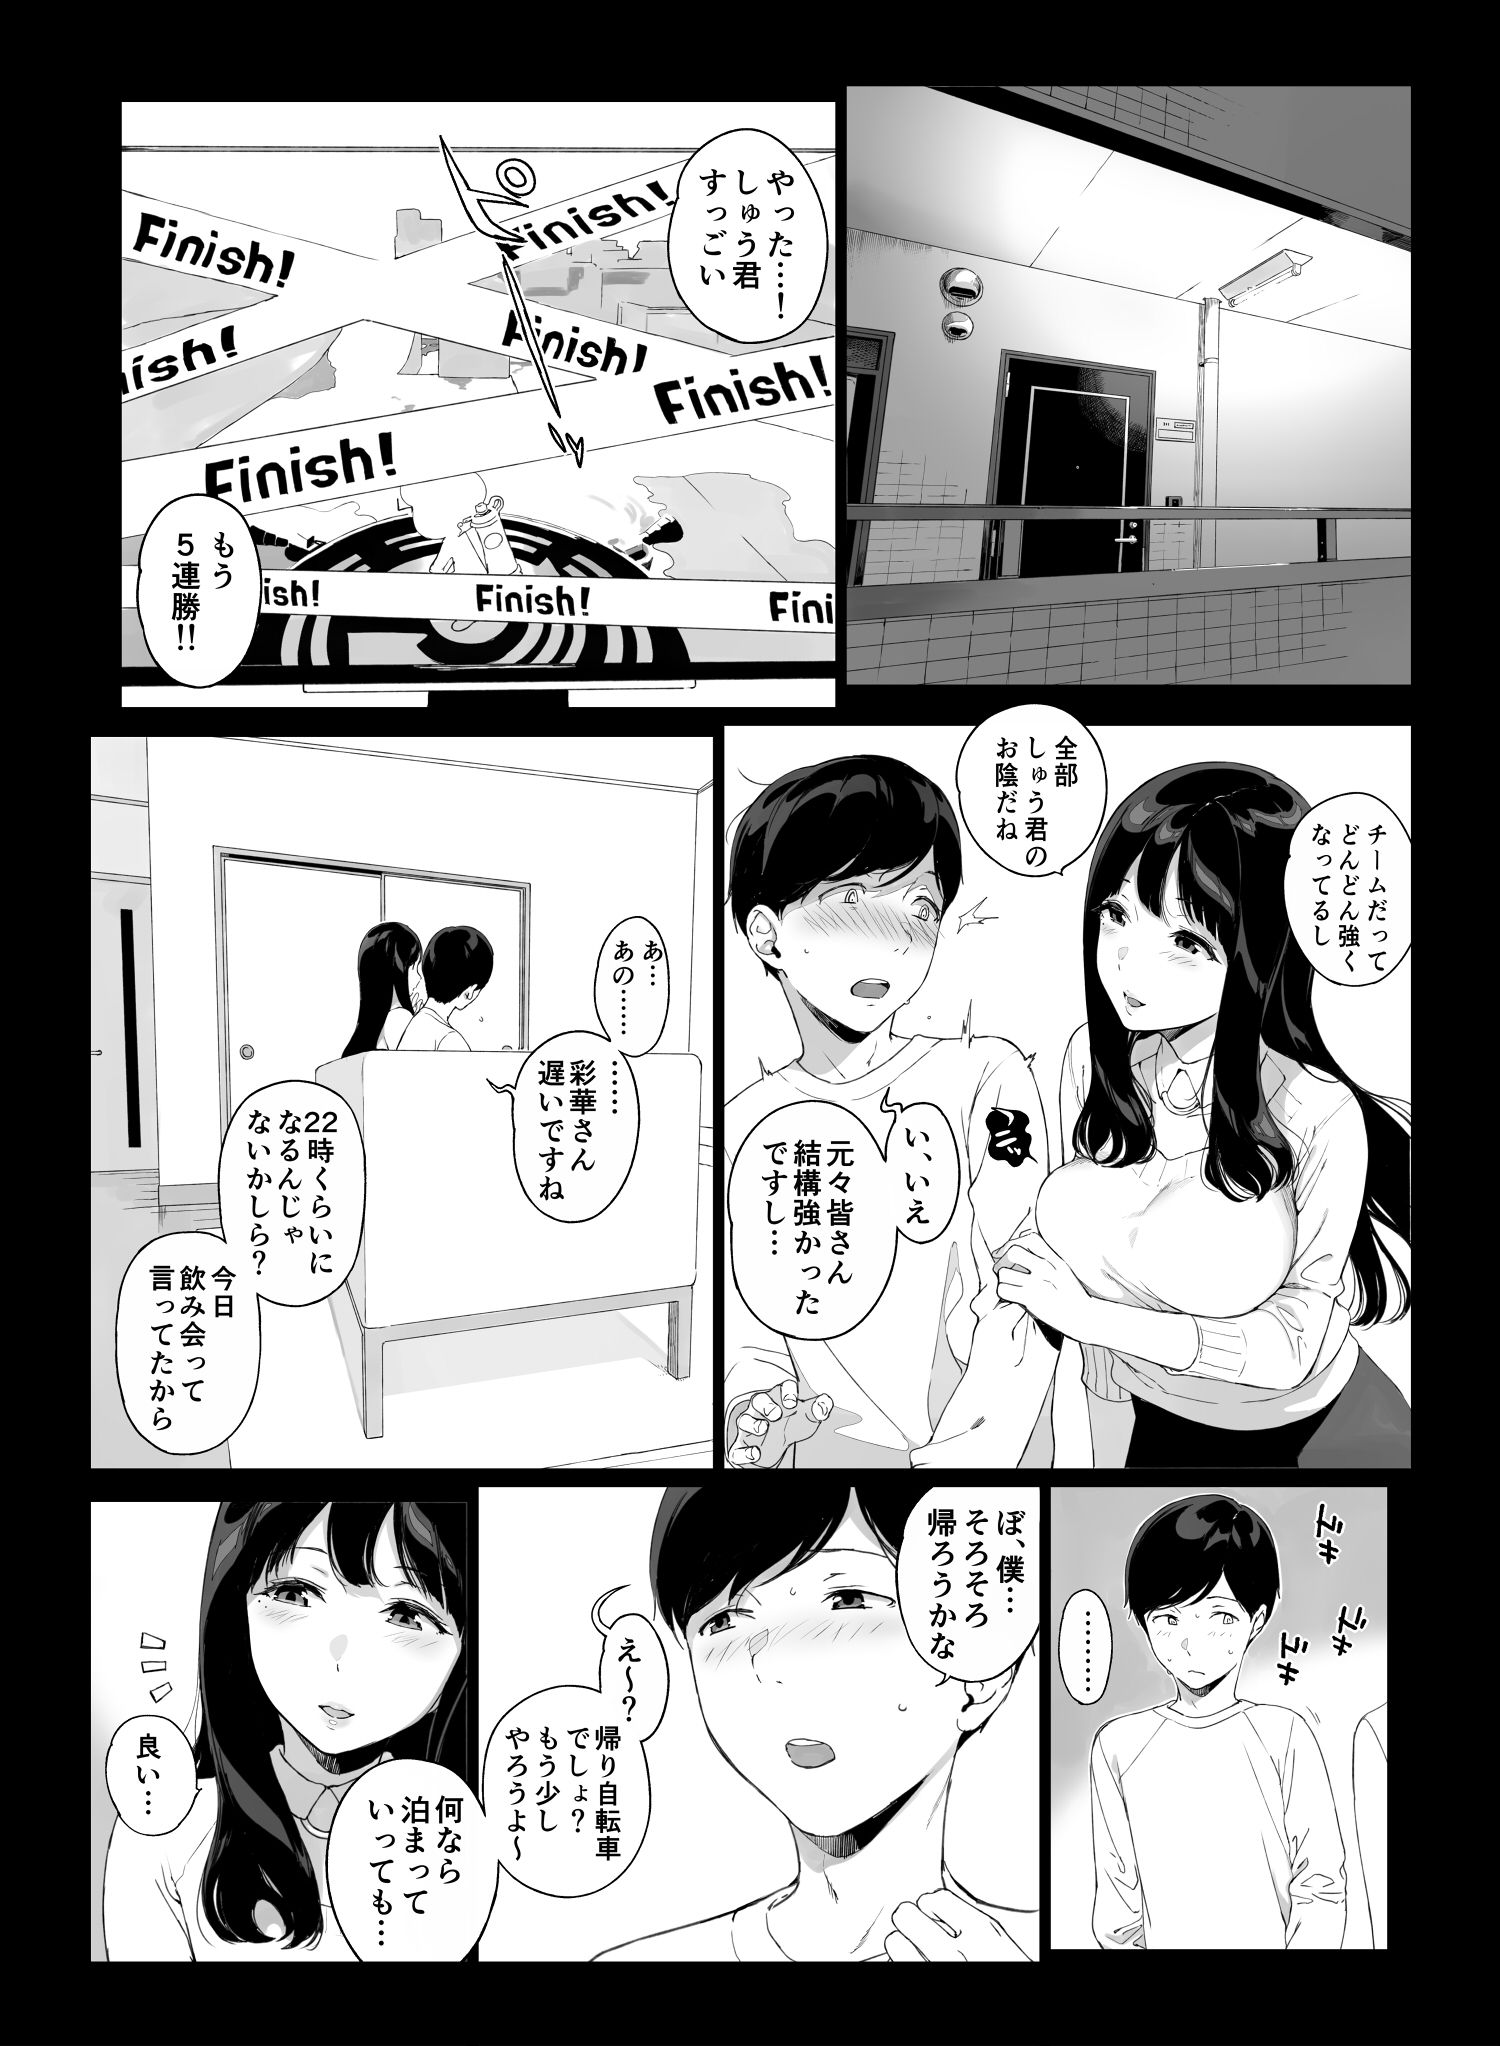 Secondary M men's group www Part 2 [erotic image] who is excited by being verbally blamed by a girl 37